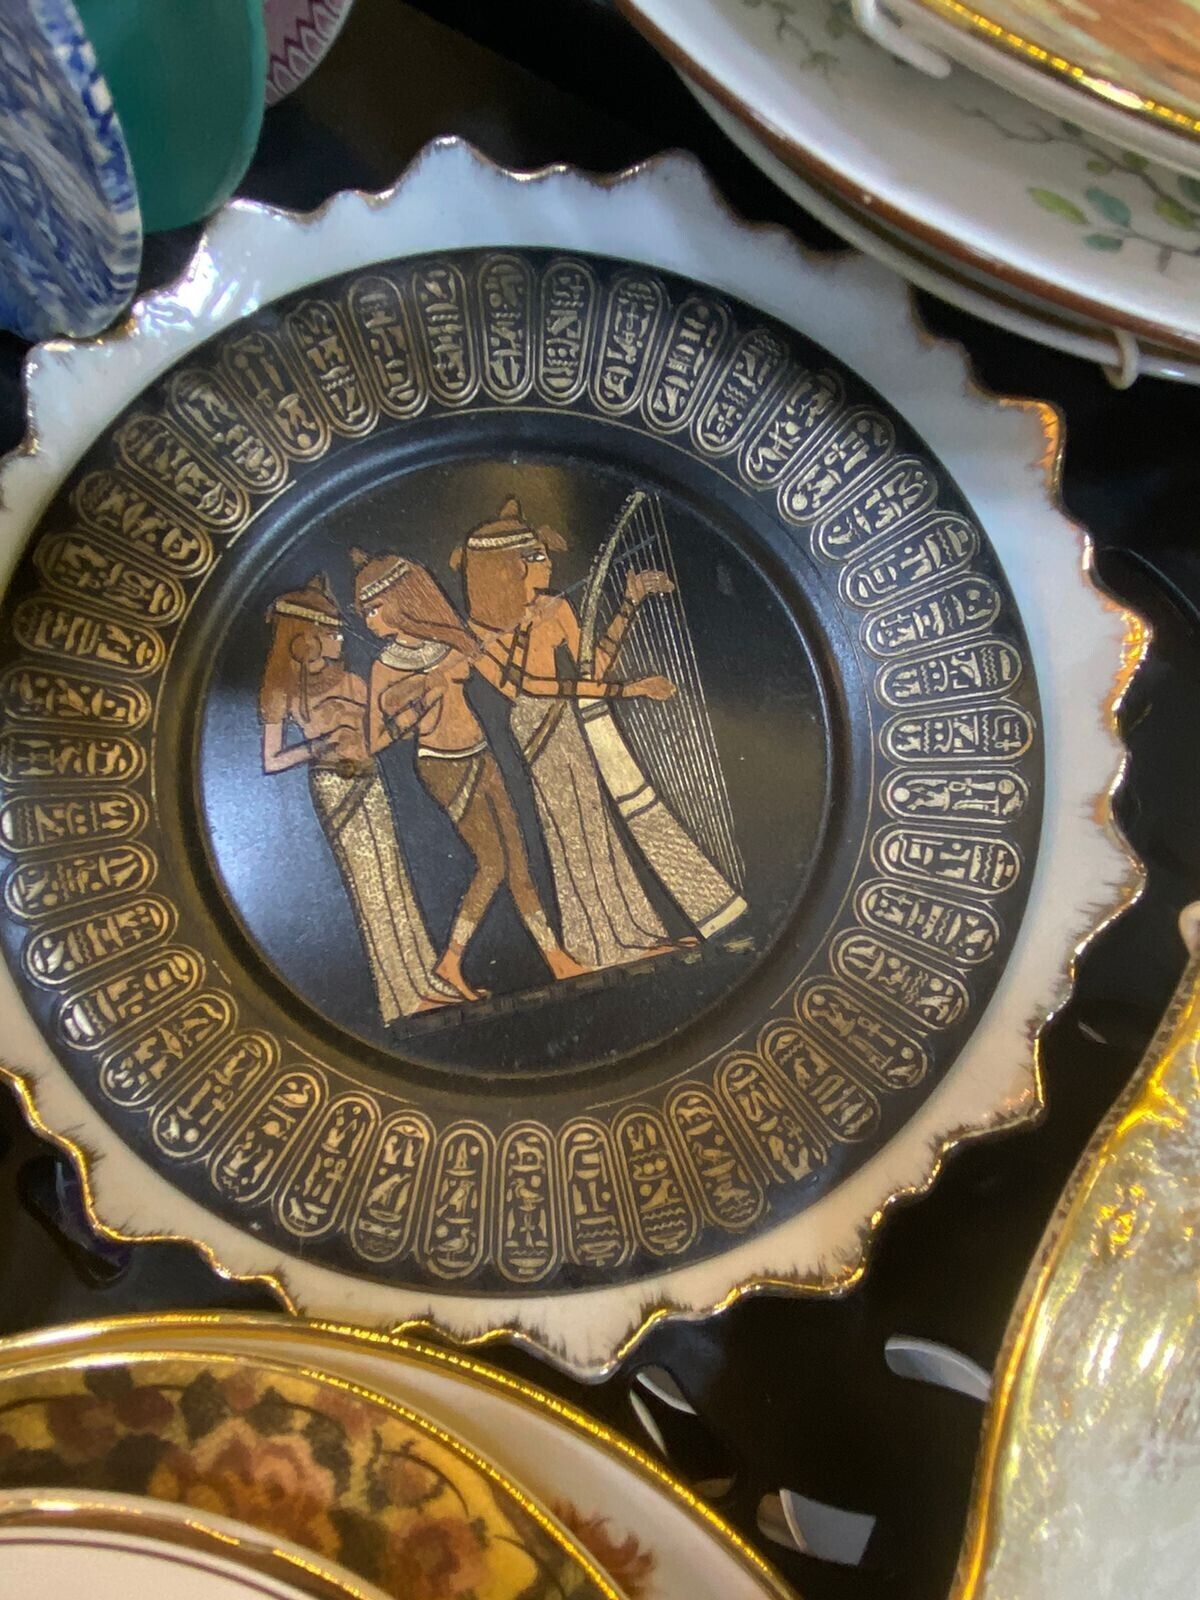 VINTAGE EGYPTIAN ENGRAVED PLATE Dish with classic ancient Egyptian drawings